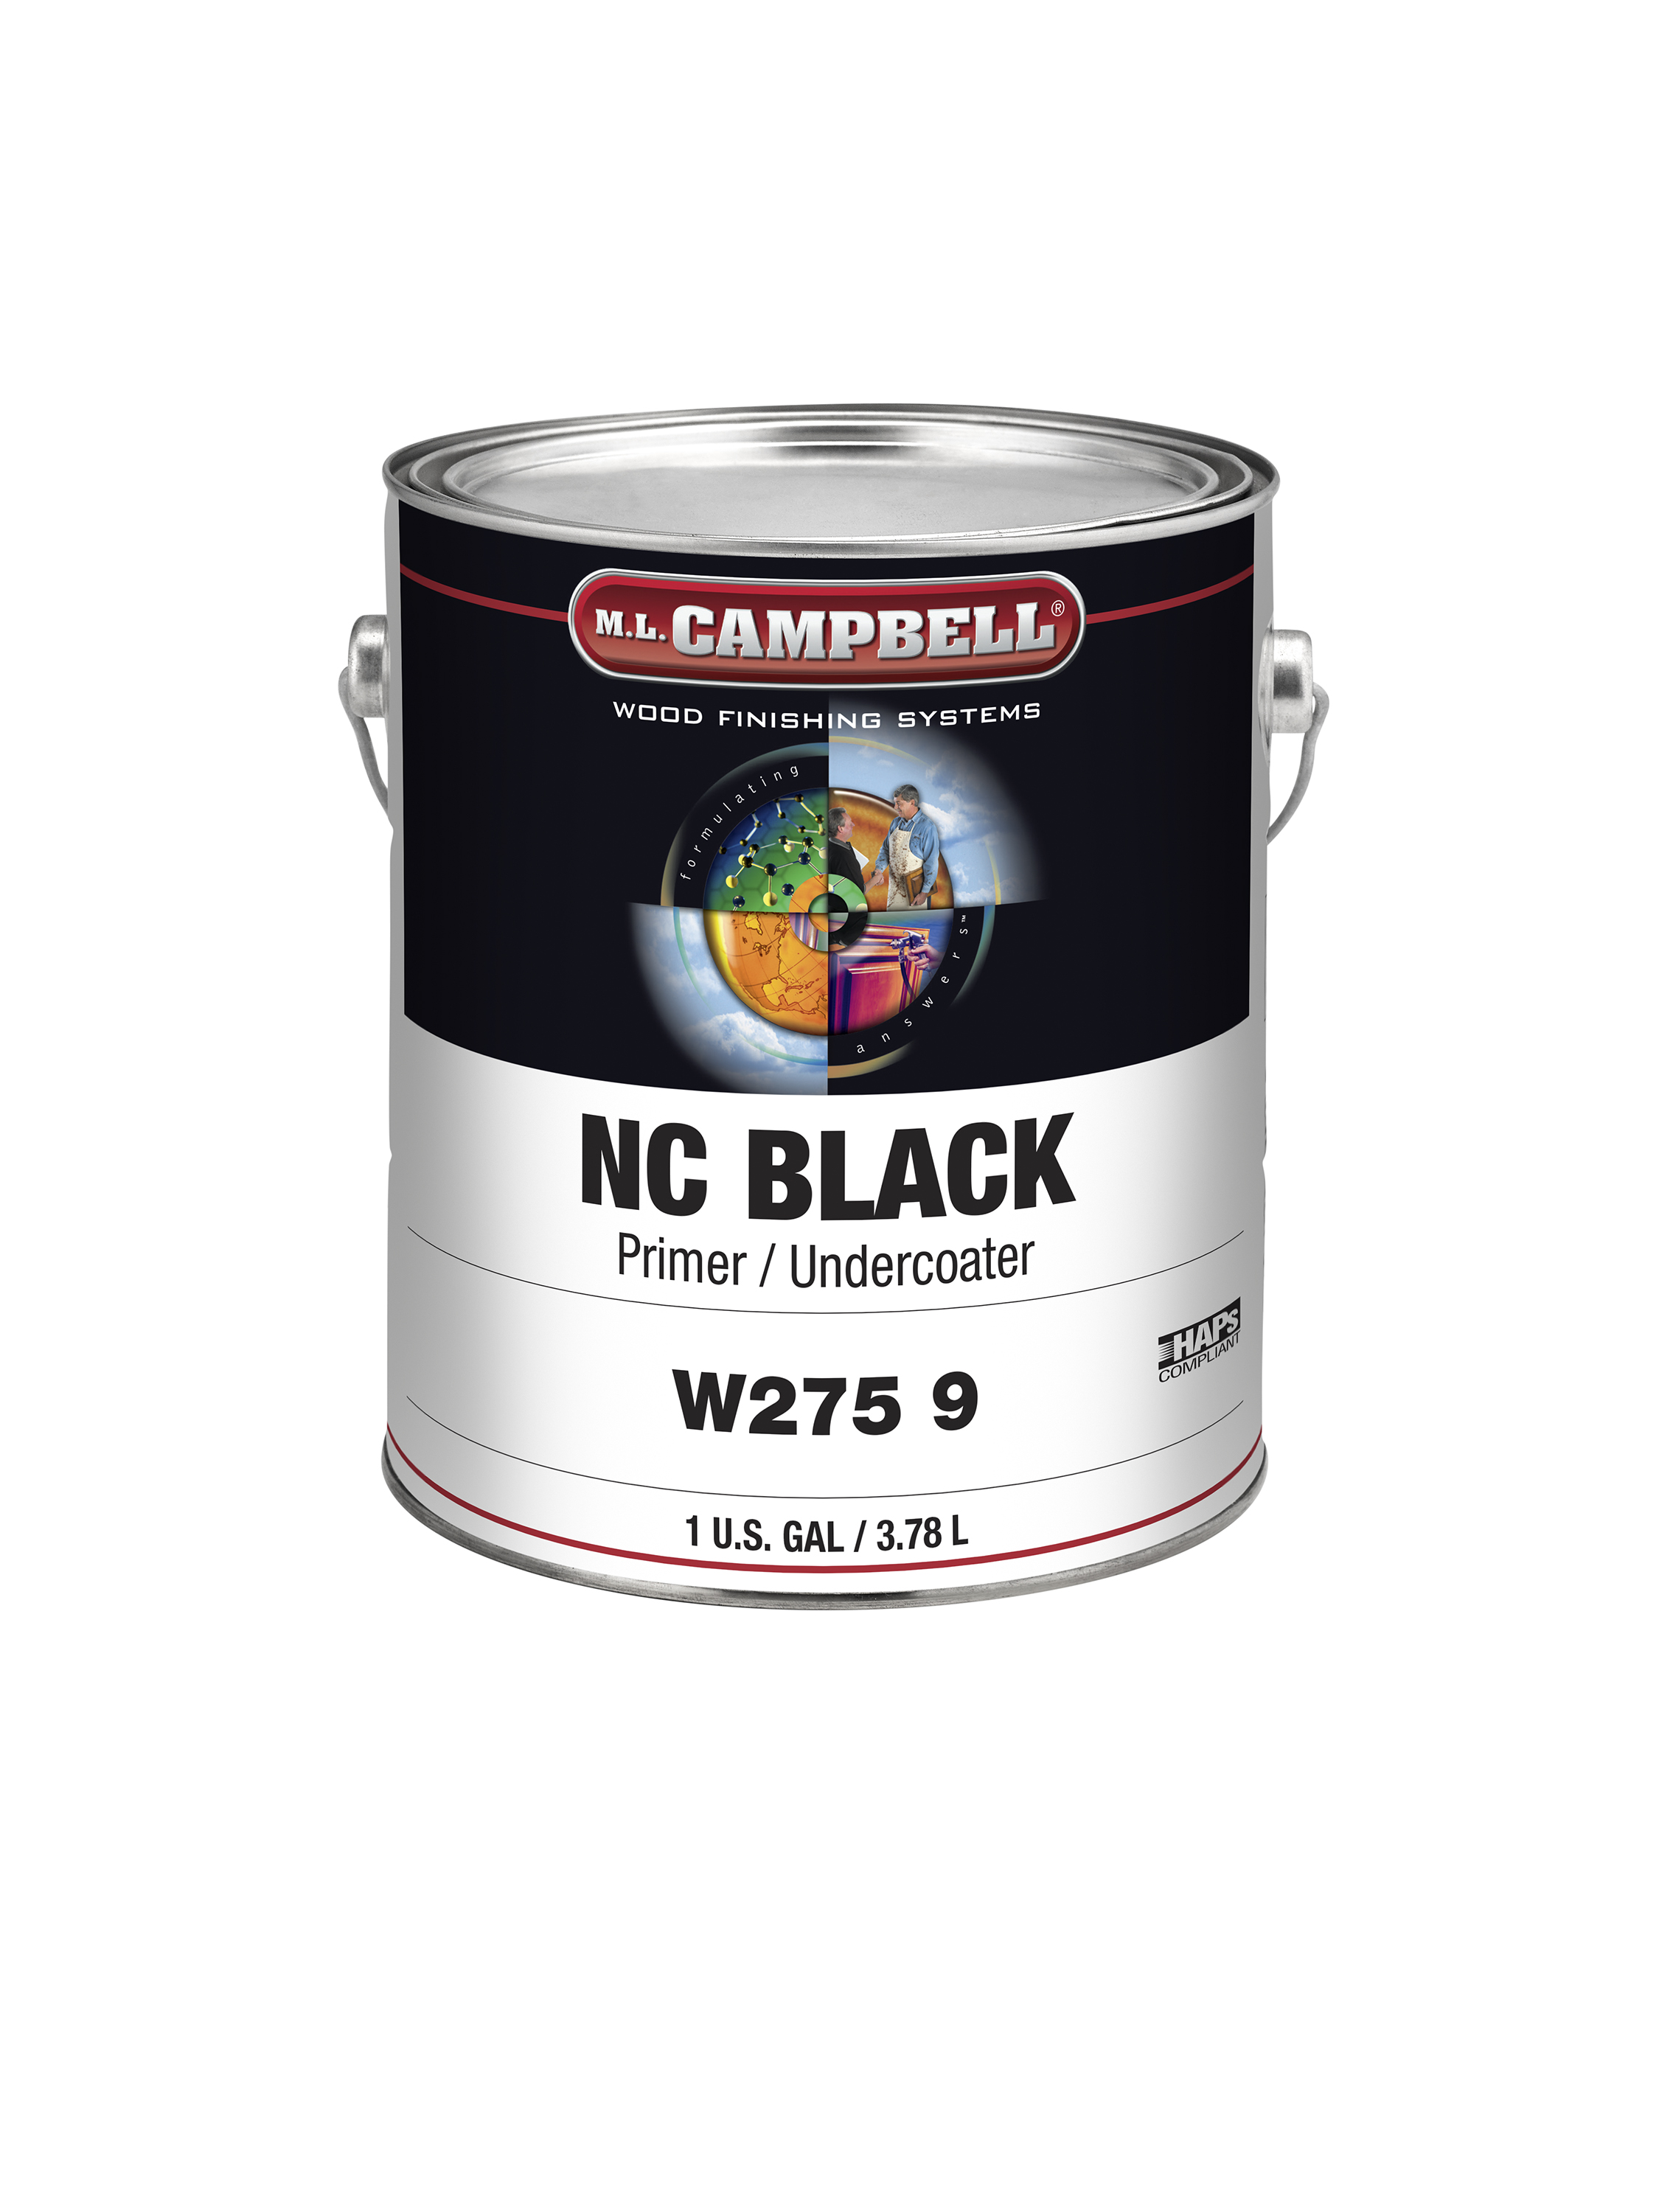 High Solids Black Primer (897) – Goudey Quality Stains & Lacquers